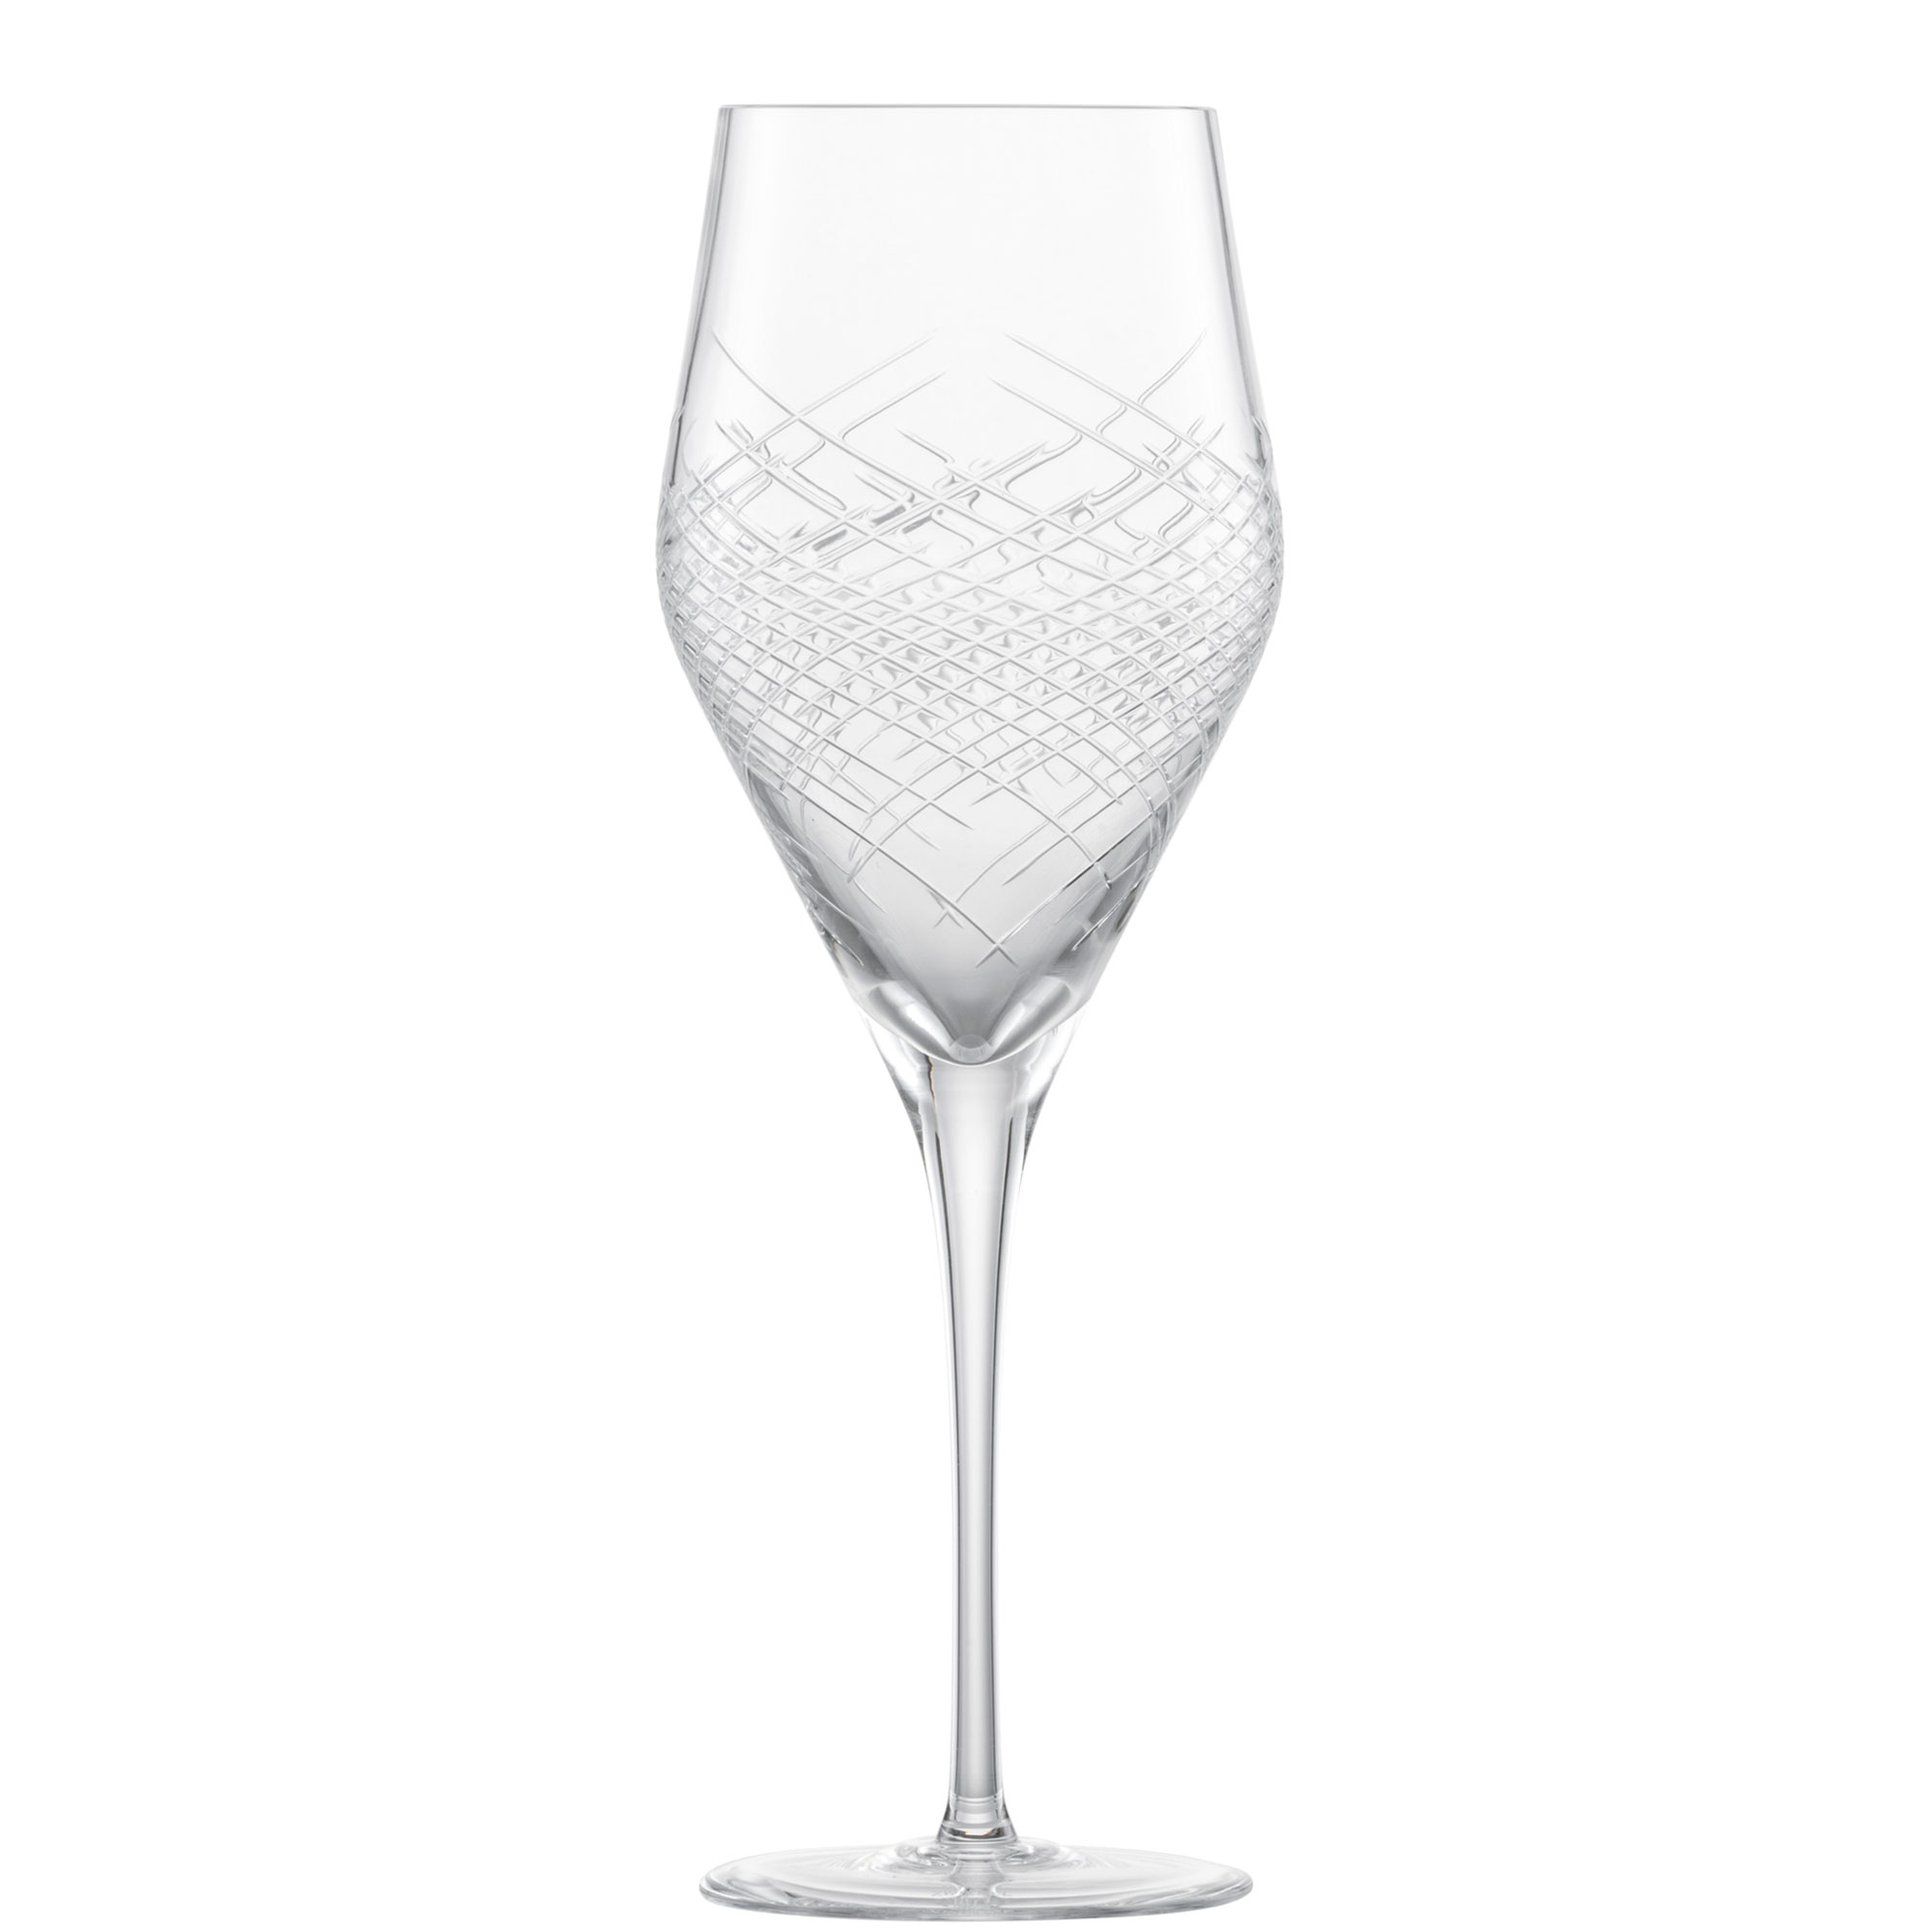 All-round wine glass Hommage Comète, Zwiesel Glas - 357ml (1 pc.)